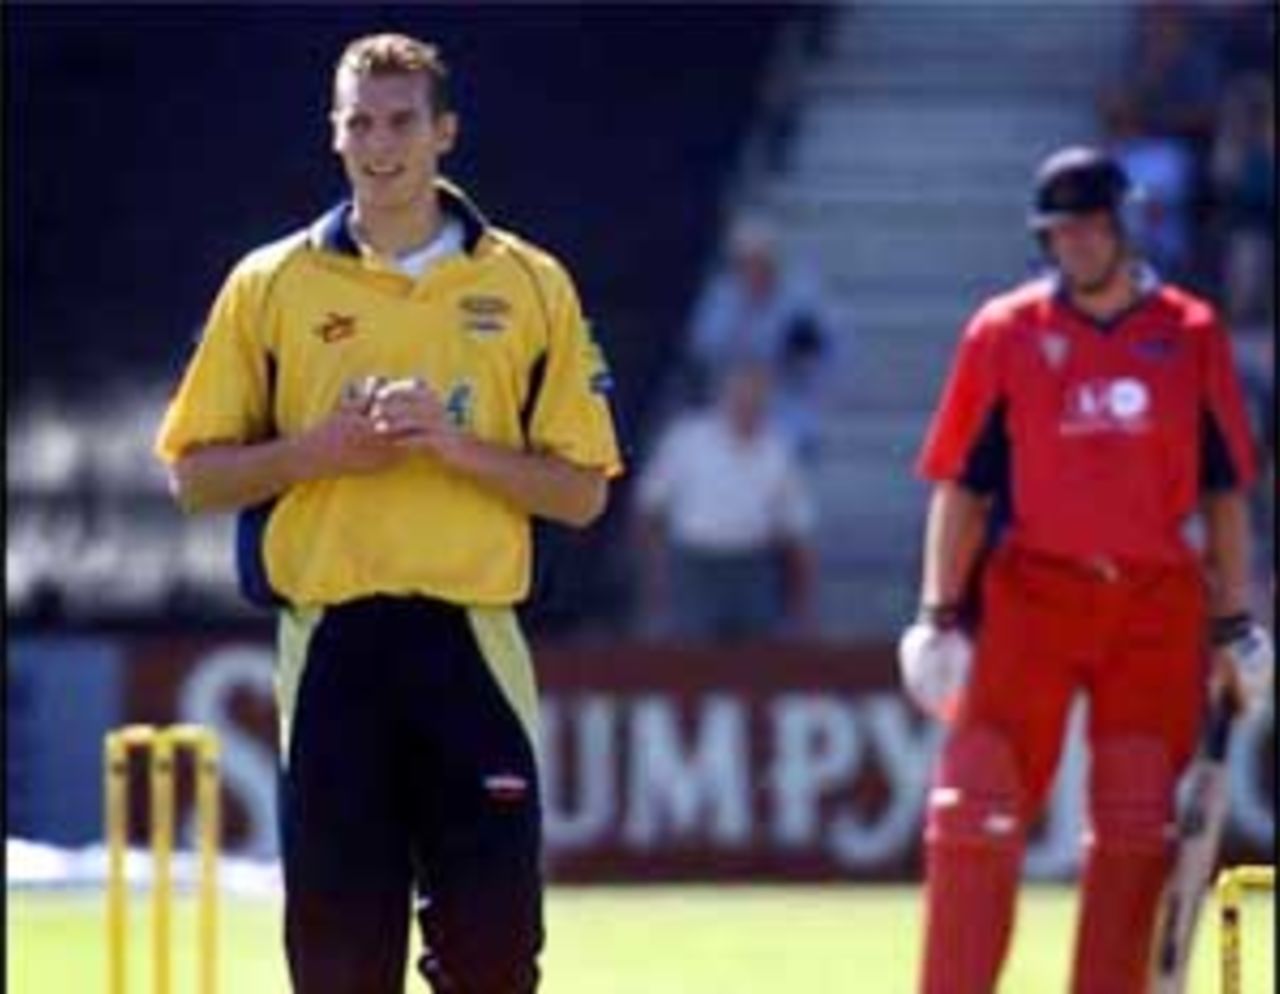 Chris Tremlett prepares to bowl in NUL match against Lancashire at the Rose Bowl